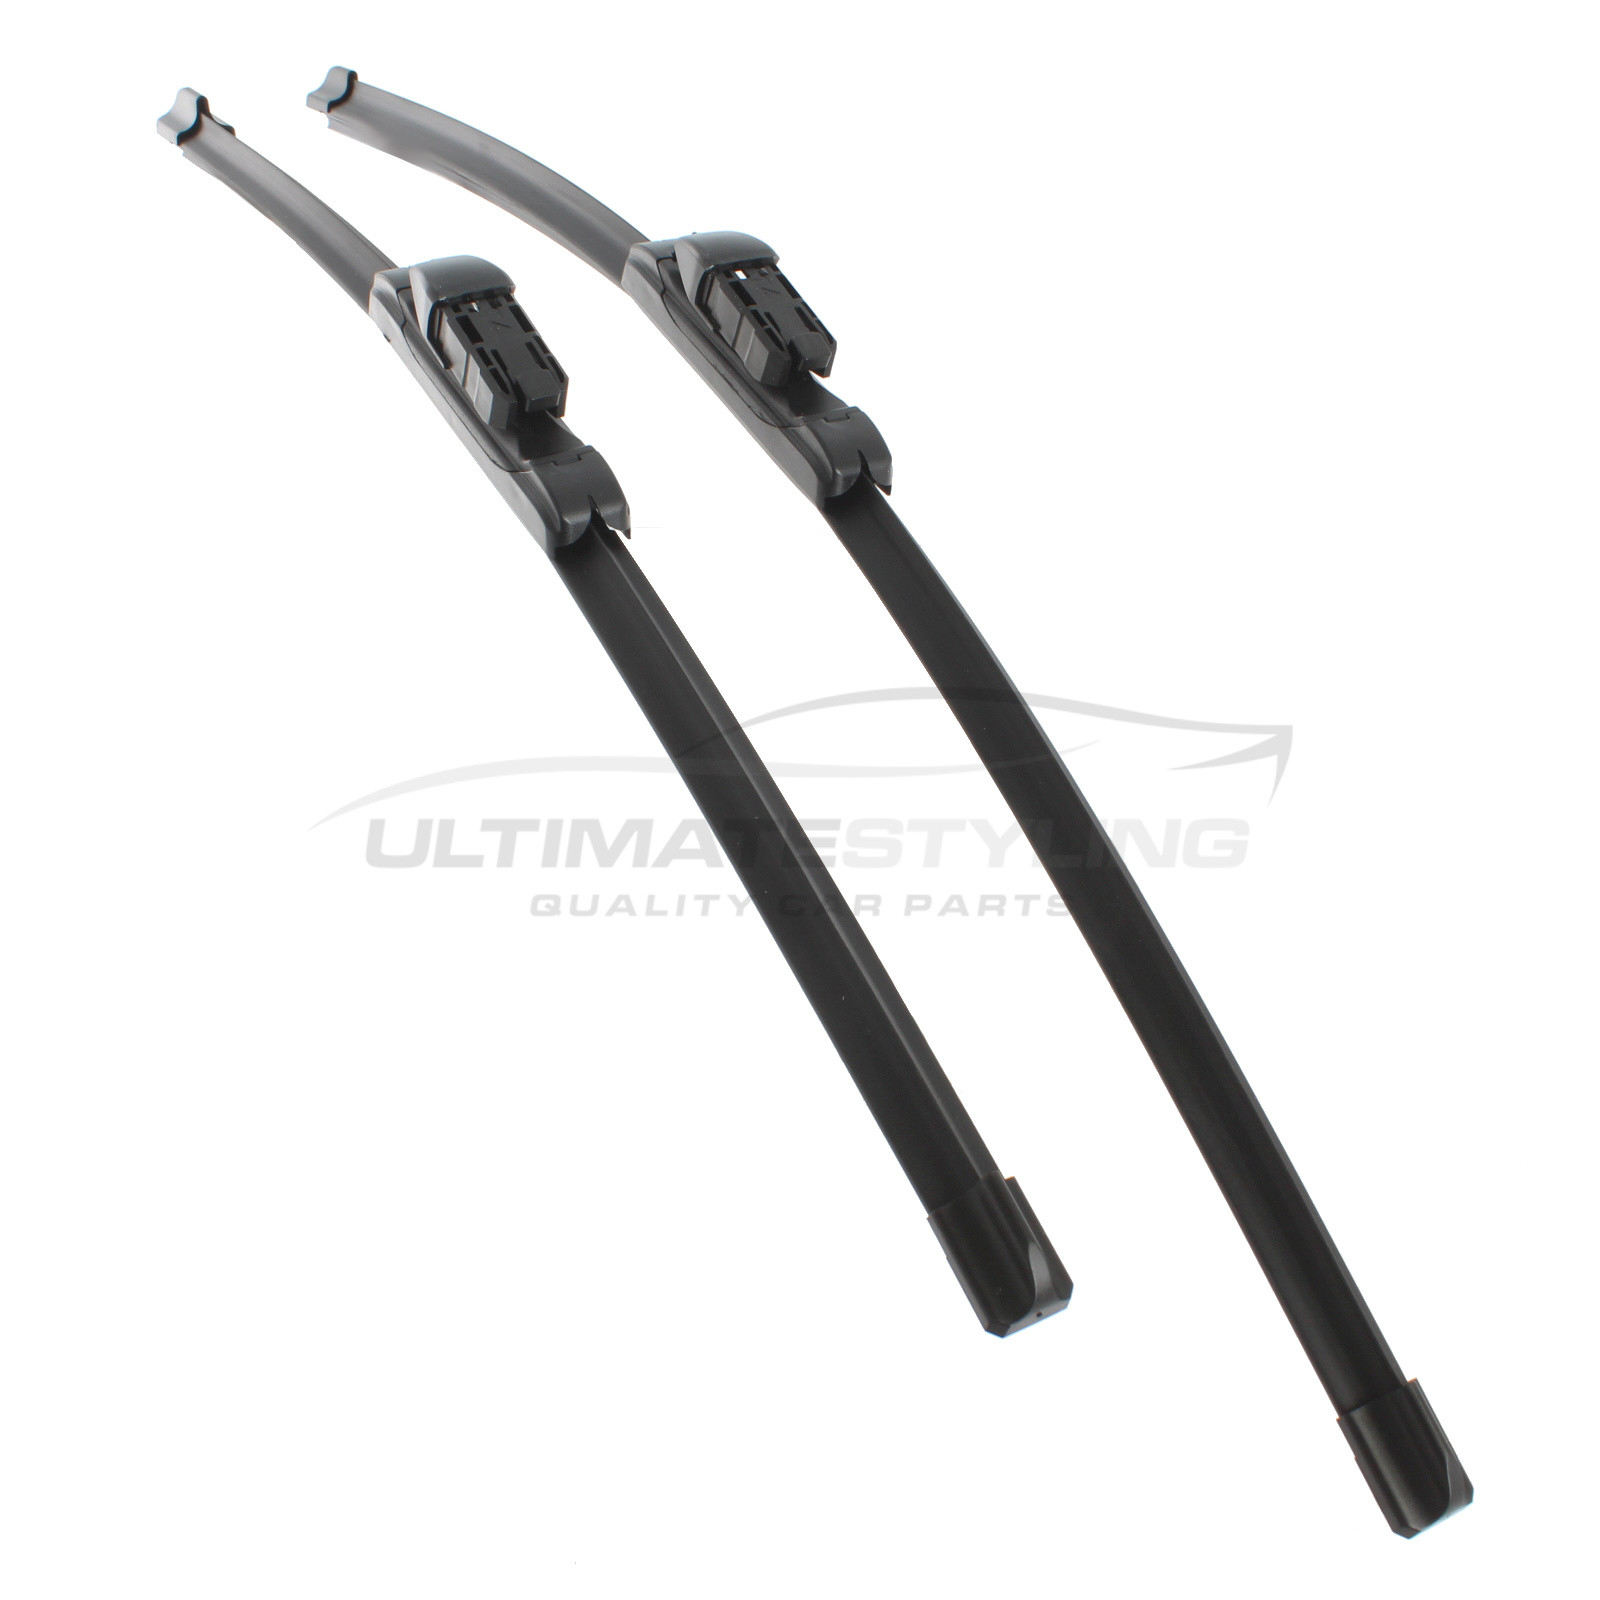 Drivers Side & Passenger Side (Front) Wiper Blades for VW Eos